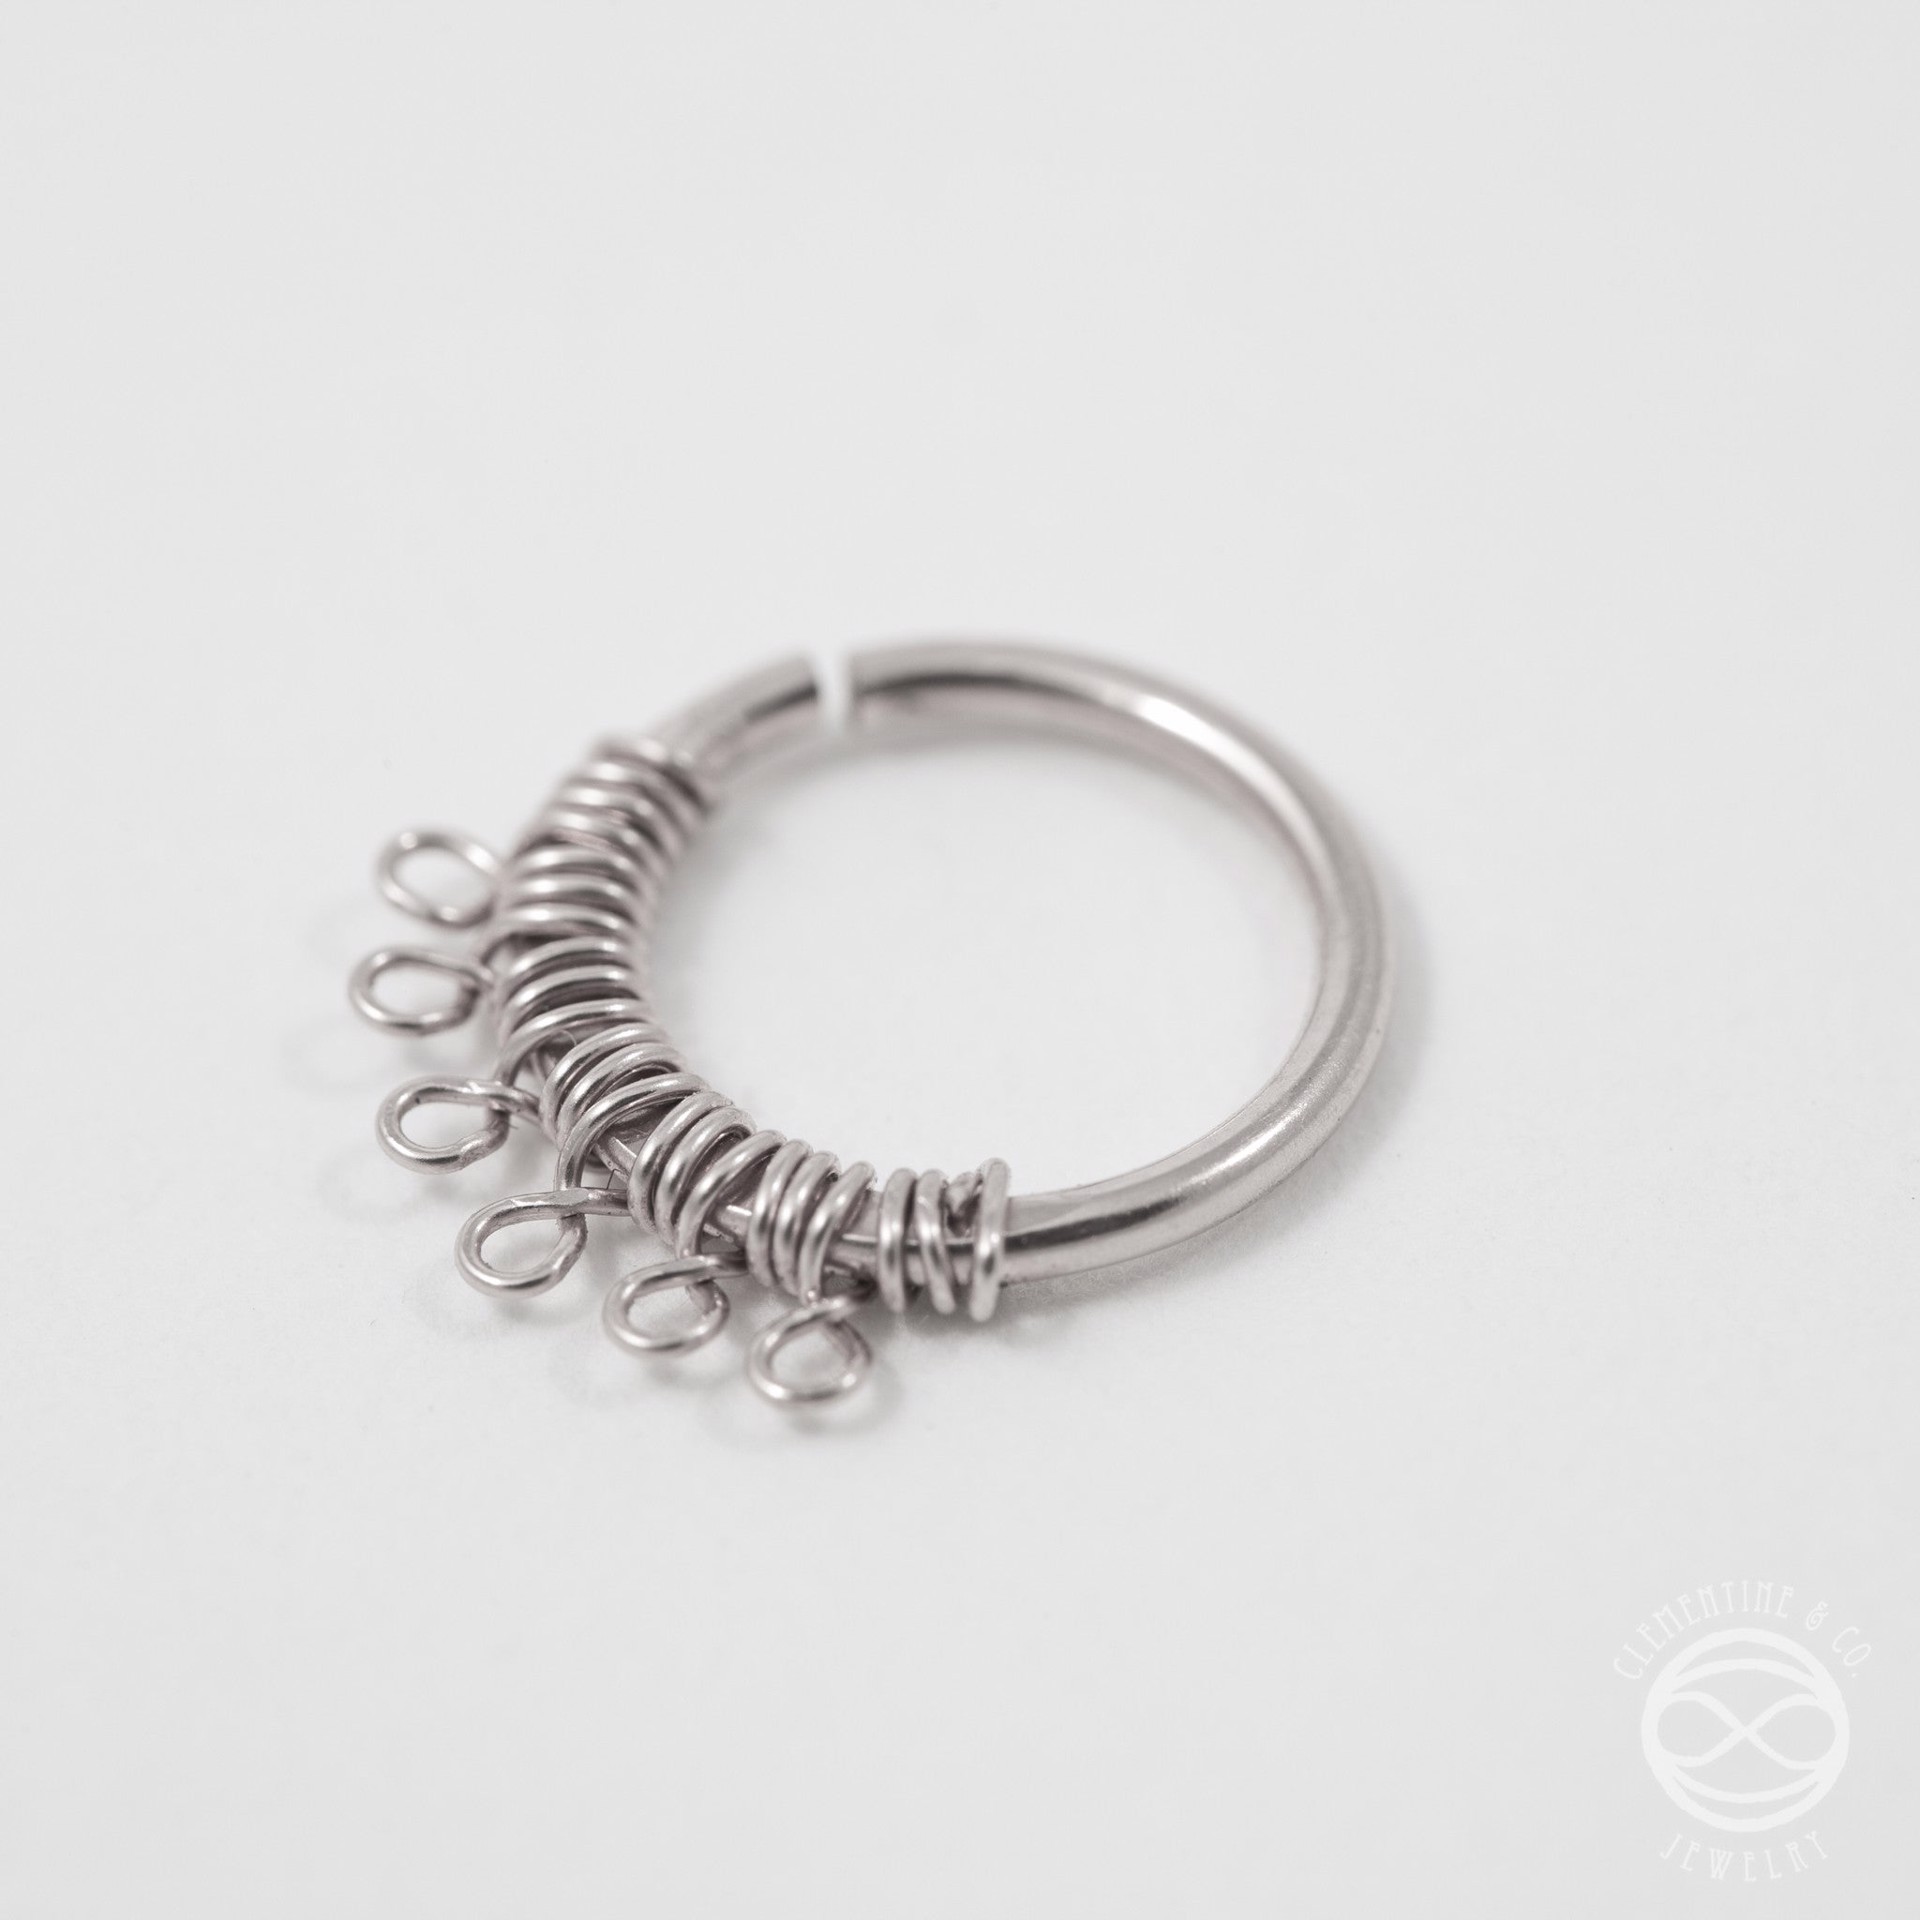 Filigree Septum Ring in Silver - 18 / 7mm by Clementine & Co. Jewelry